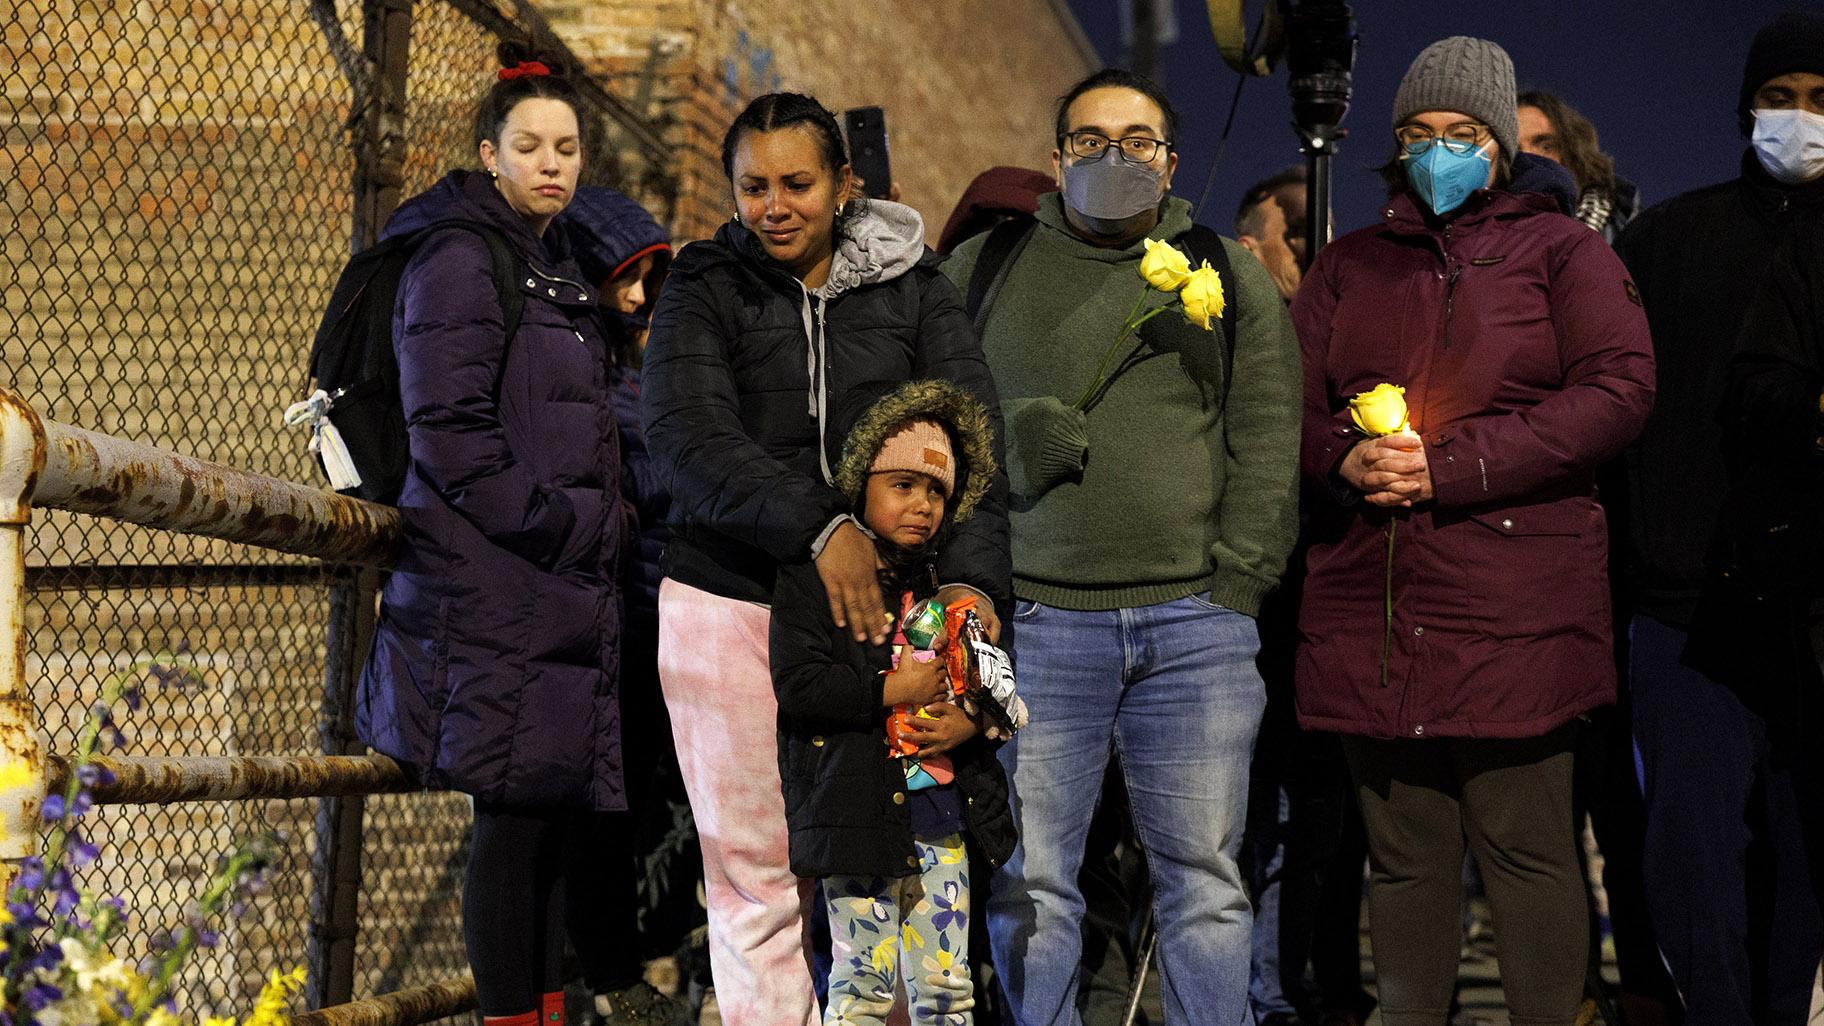 A woman and child cry while attending a vigil for 5-year-old Jean Carlos Martinez Rivero, who died over the weekend at the Lower West Side shelter, Wednesday, Dec. 20, 2023, in Chicago. (Armando L. Sanchez / Chicago Tribune via AP)